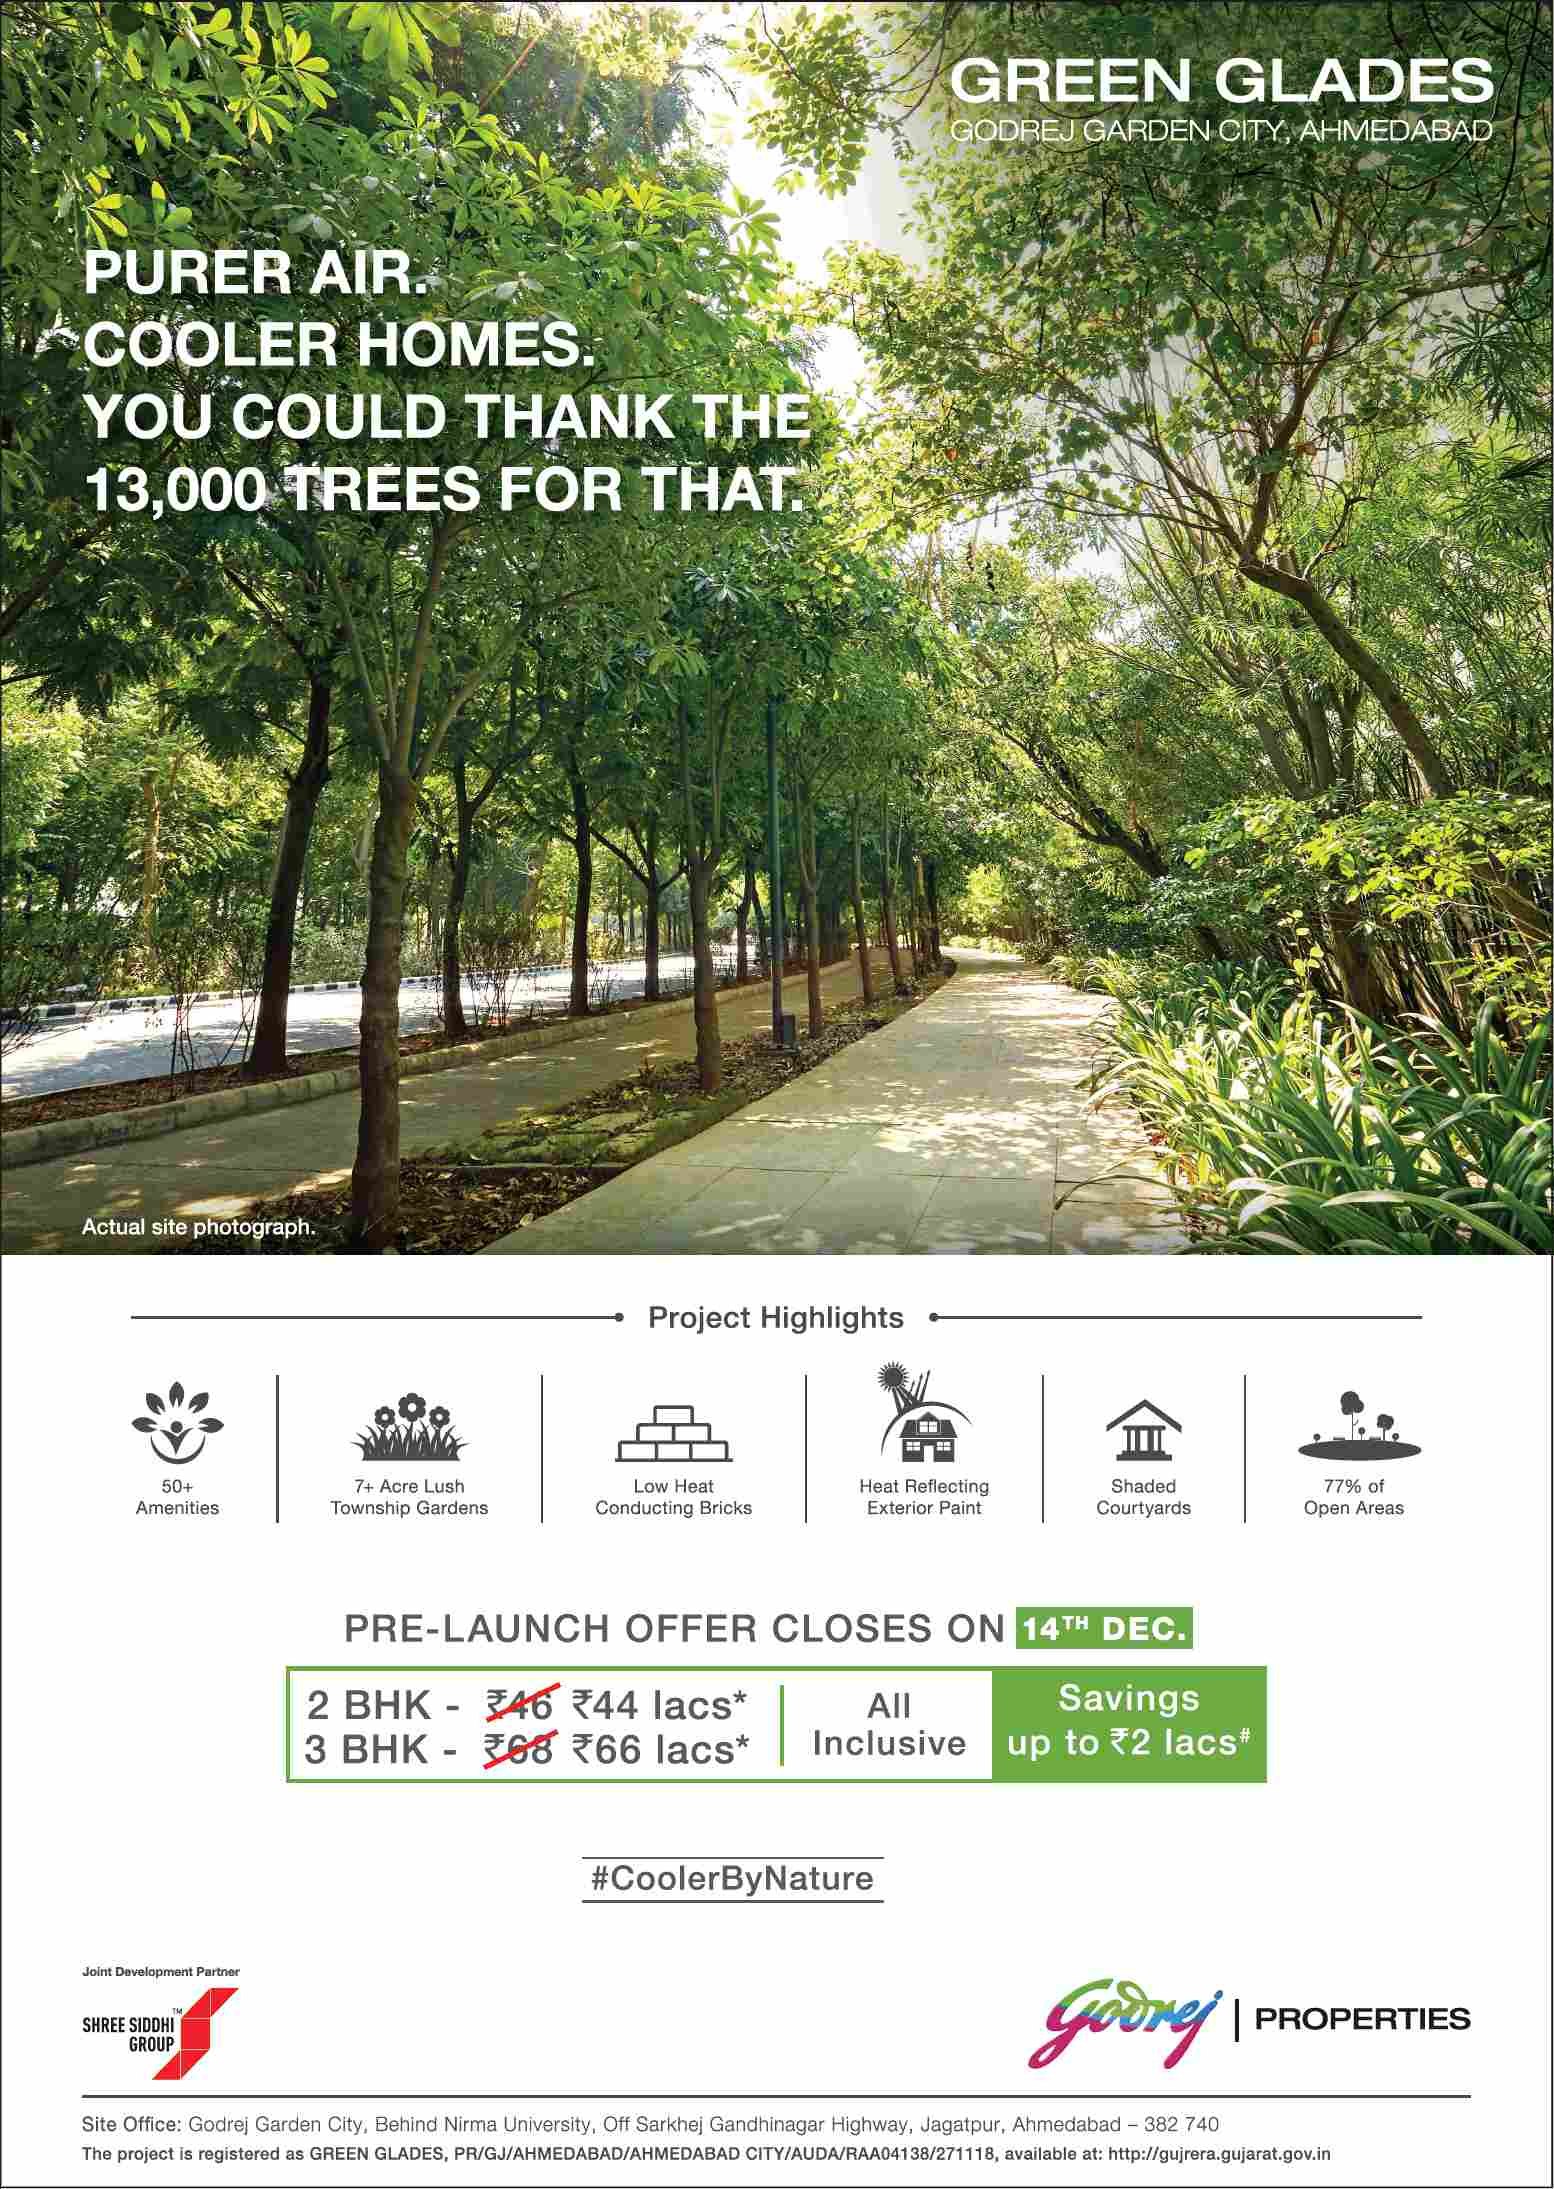 Avail the pre-launch offer & save up to Rs 2 Lacs at Godrej Green Glades in Ahmedabad